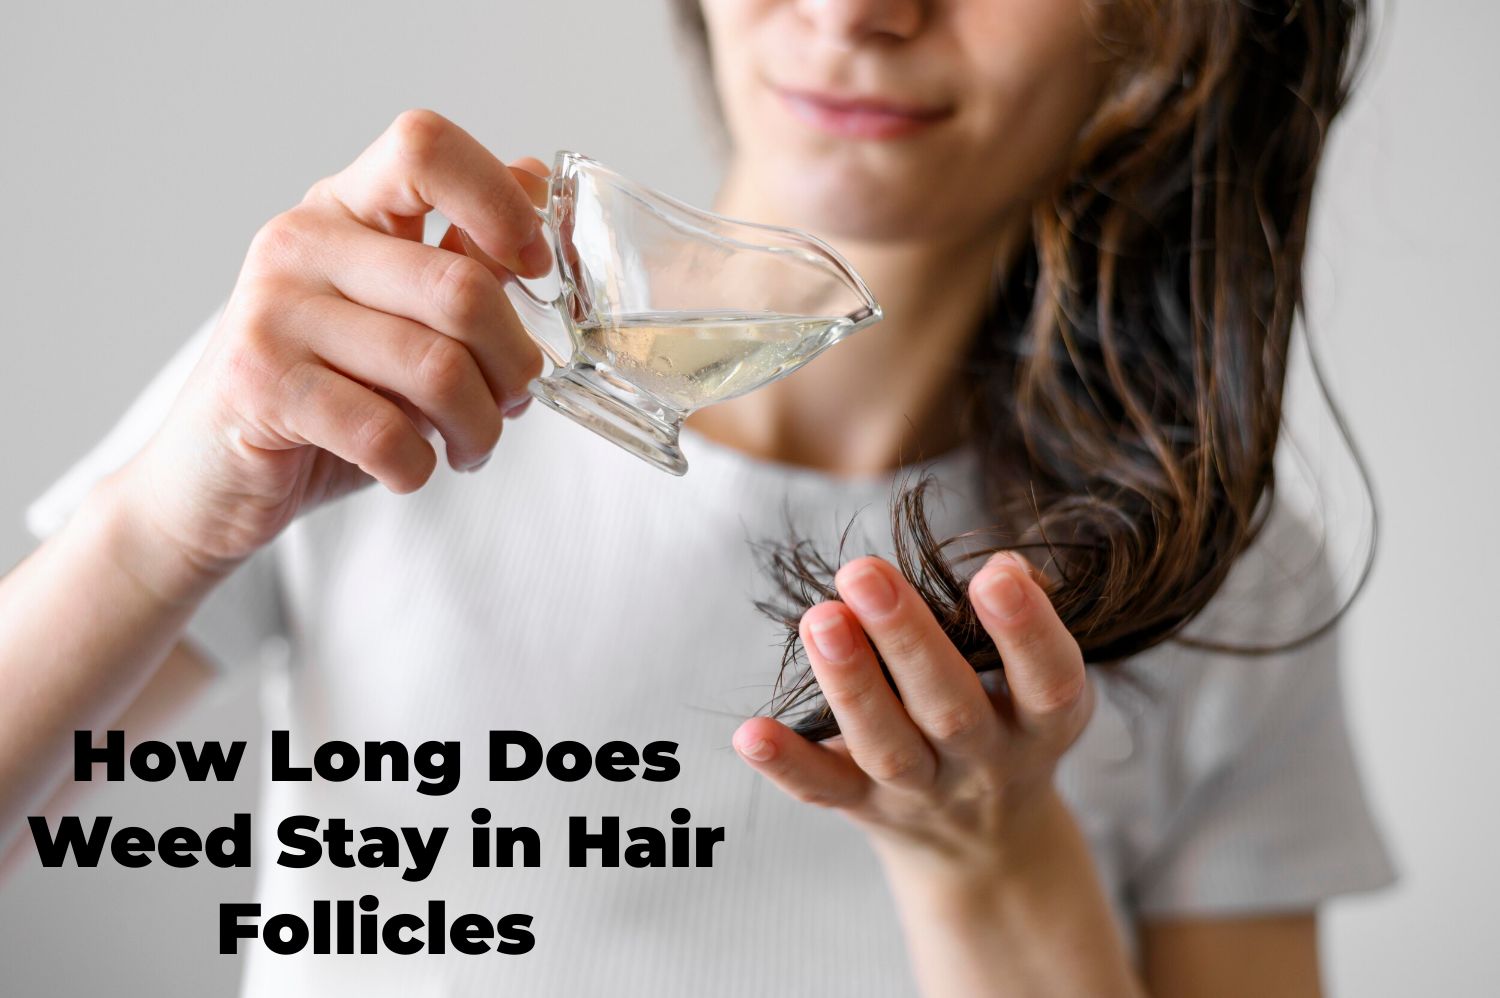 How Long Does Weed Stay in Hair Follicles